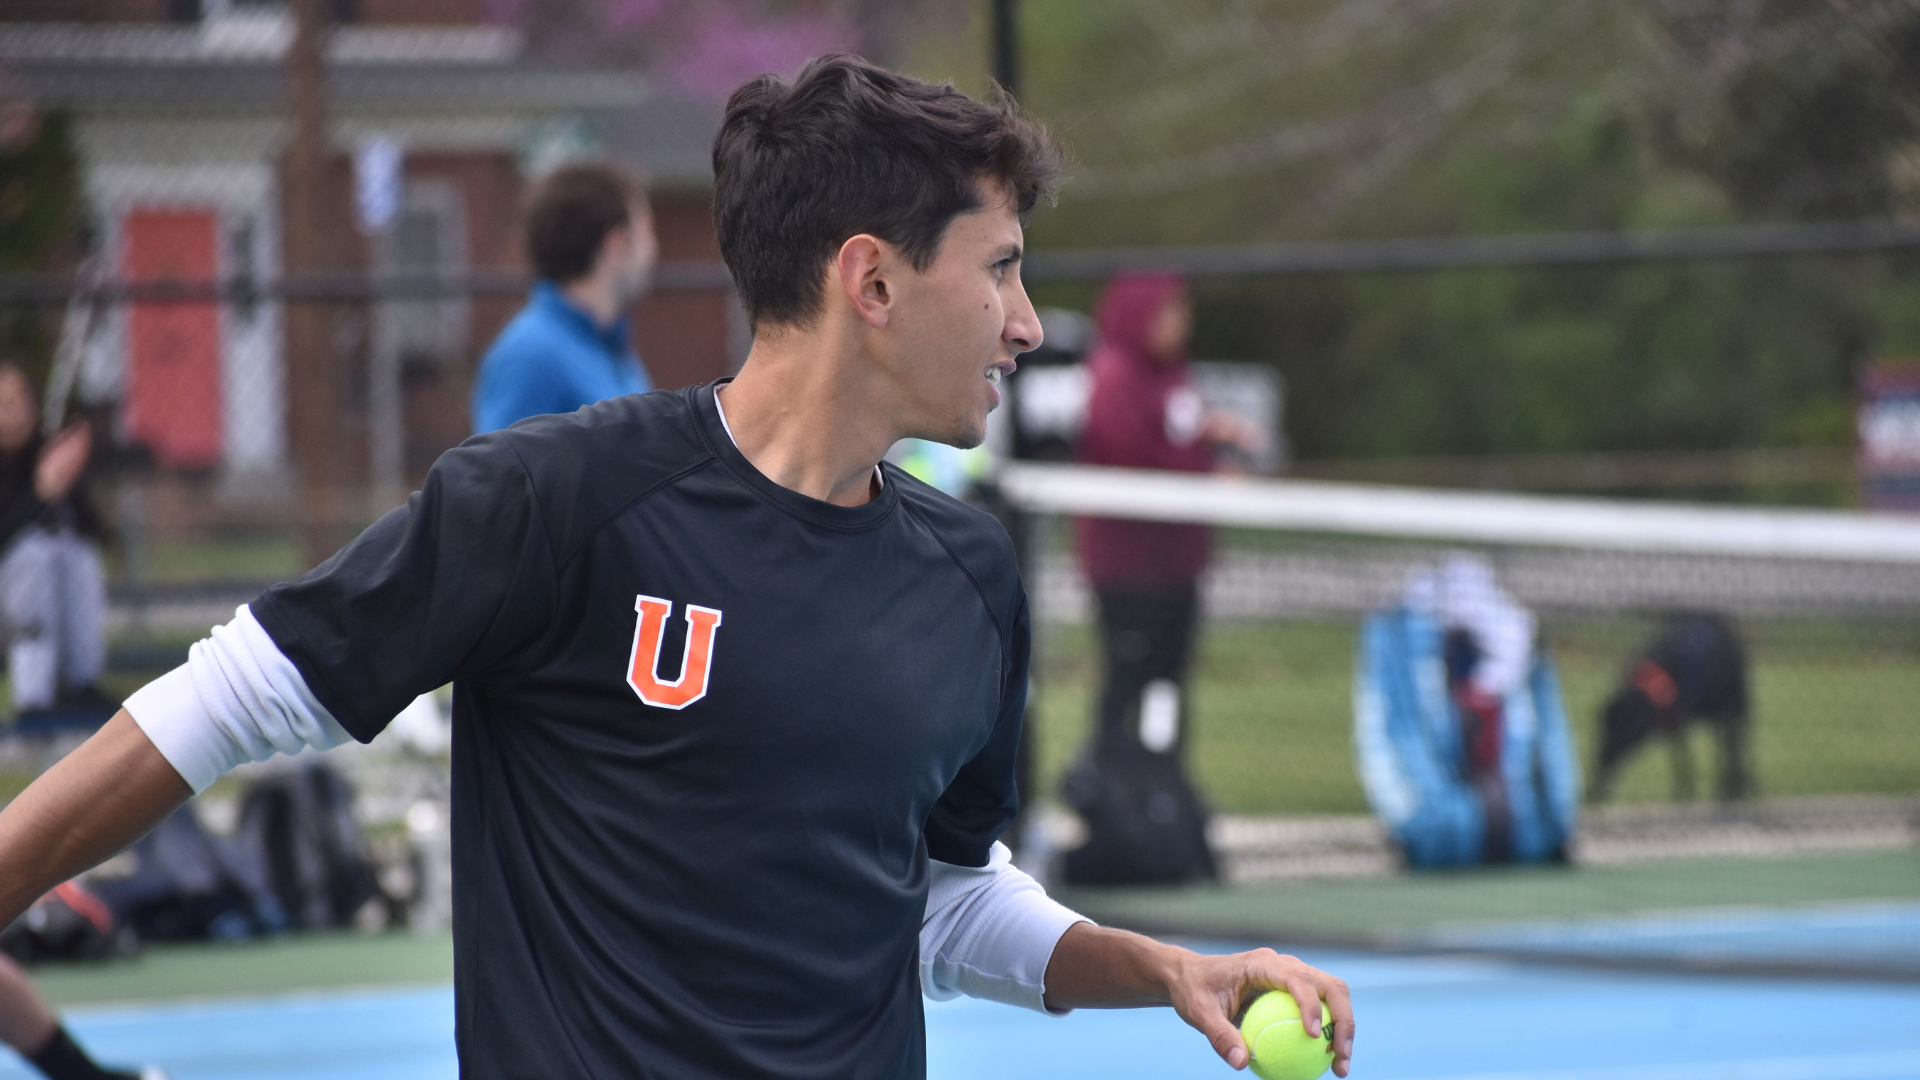 Union men’s tennis slotted at No. 14 in latest NAIA Coaches’ Poll